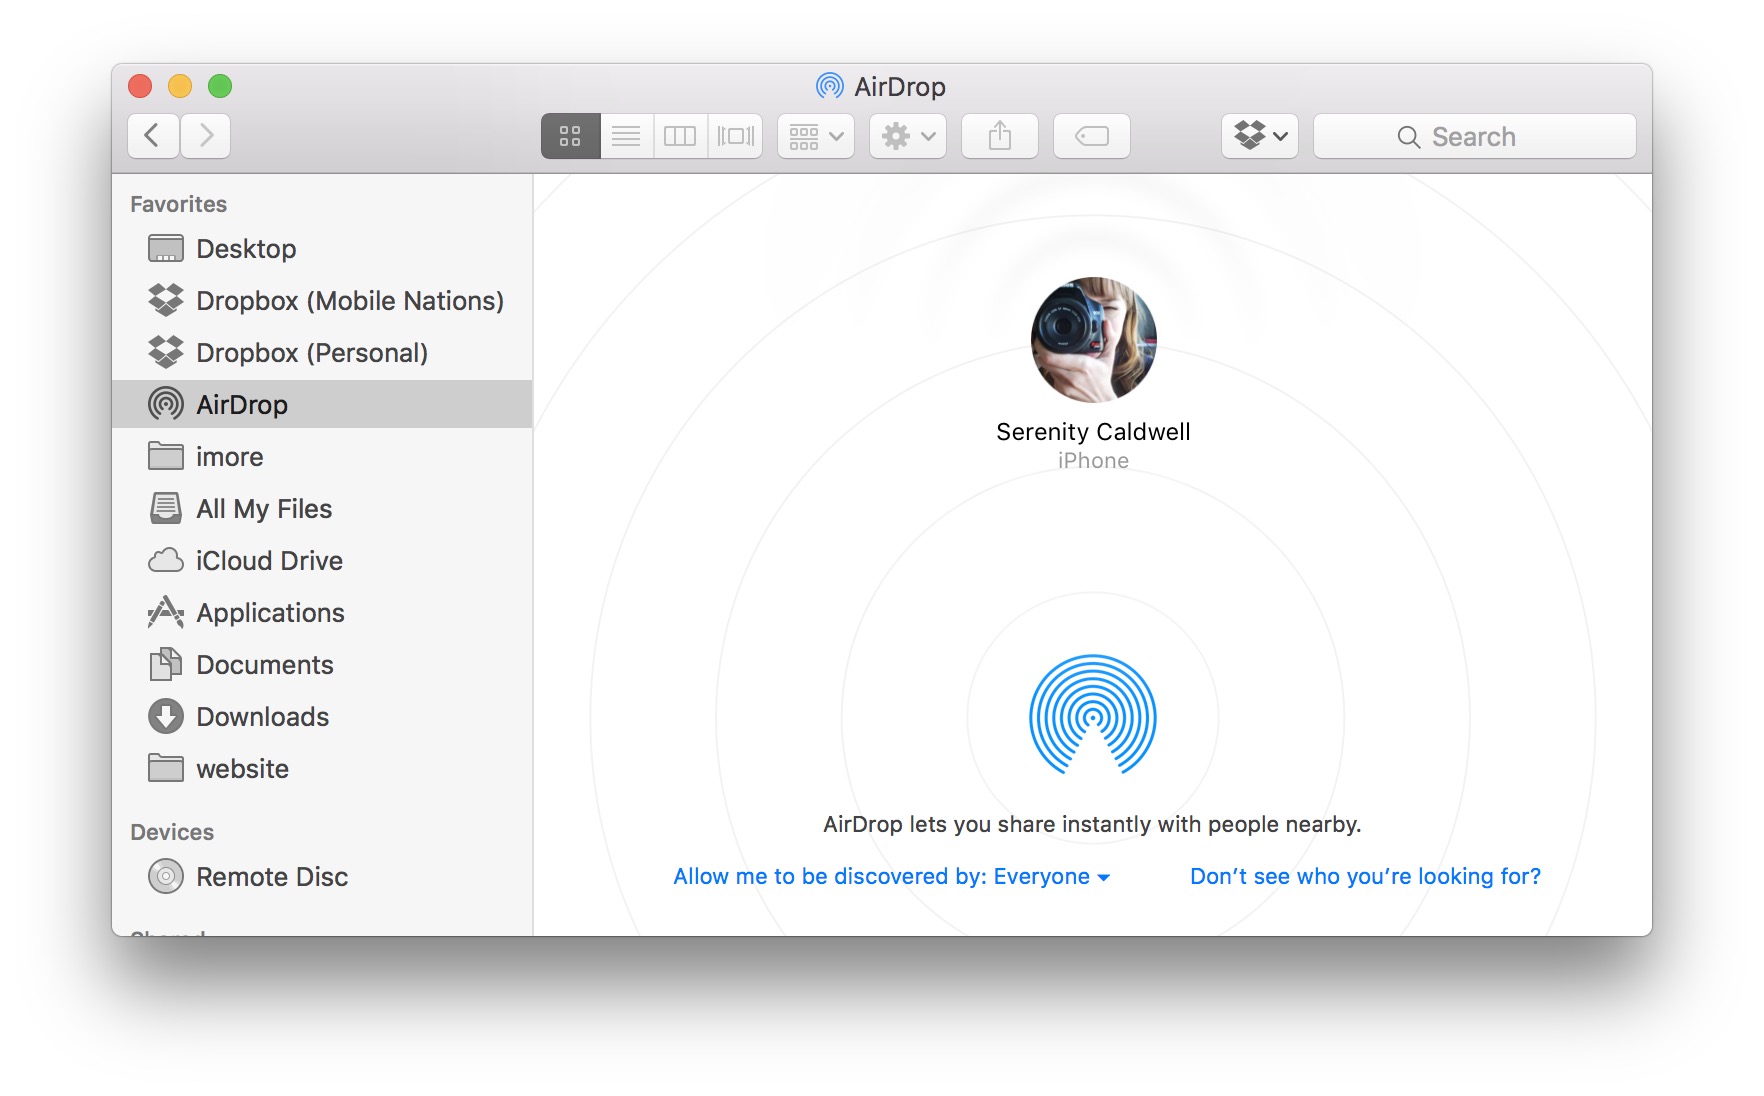 Transfer photos from mac to iphone by showing how to use AirDrop to transfer photos from your Mac to iPhone or iPad by showing steps: Open Finder on your Mac, then click AirDrop in the sidebar. Your iPhone or iPad should show up there.